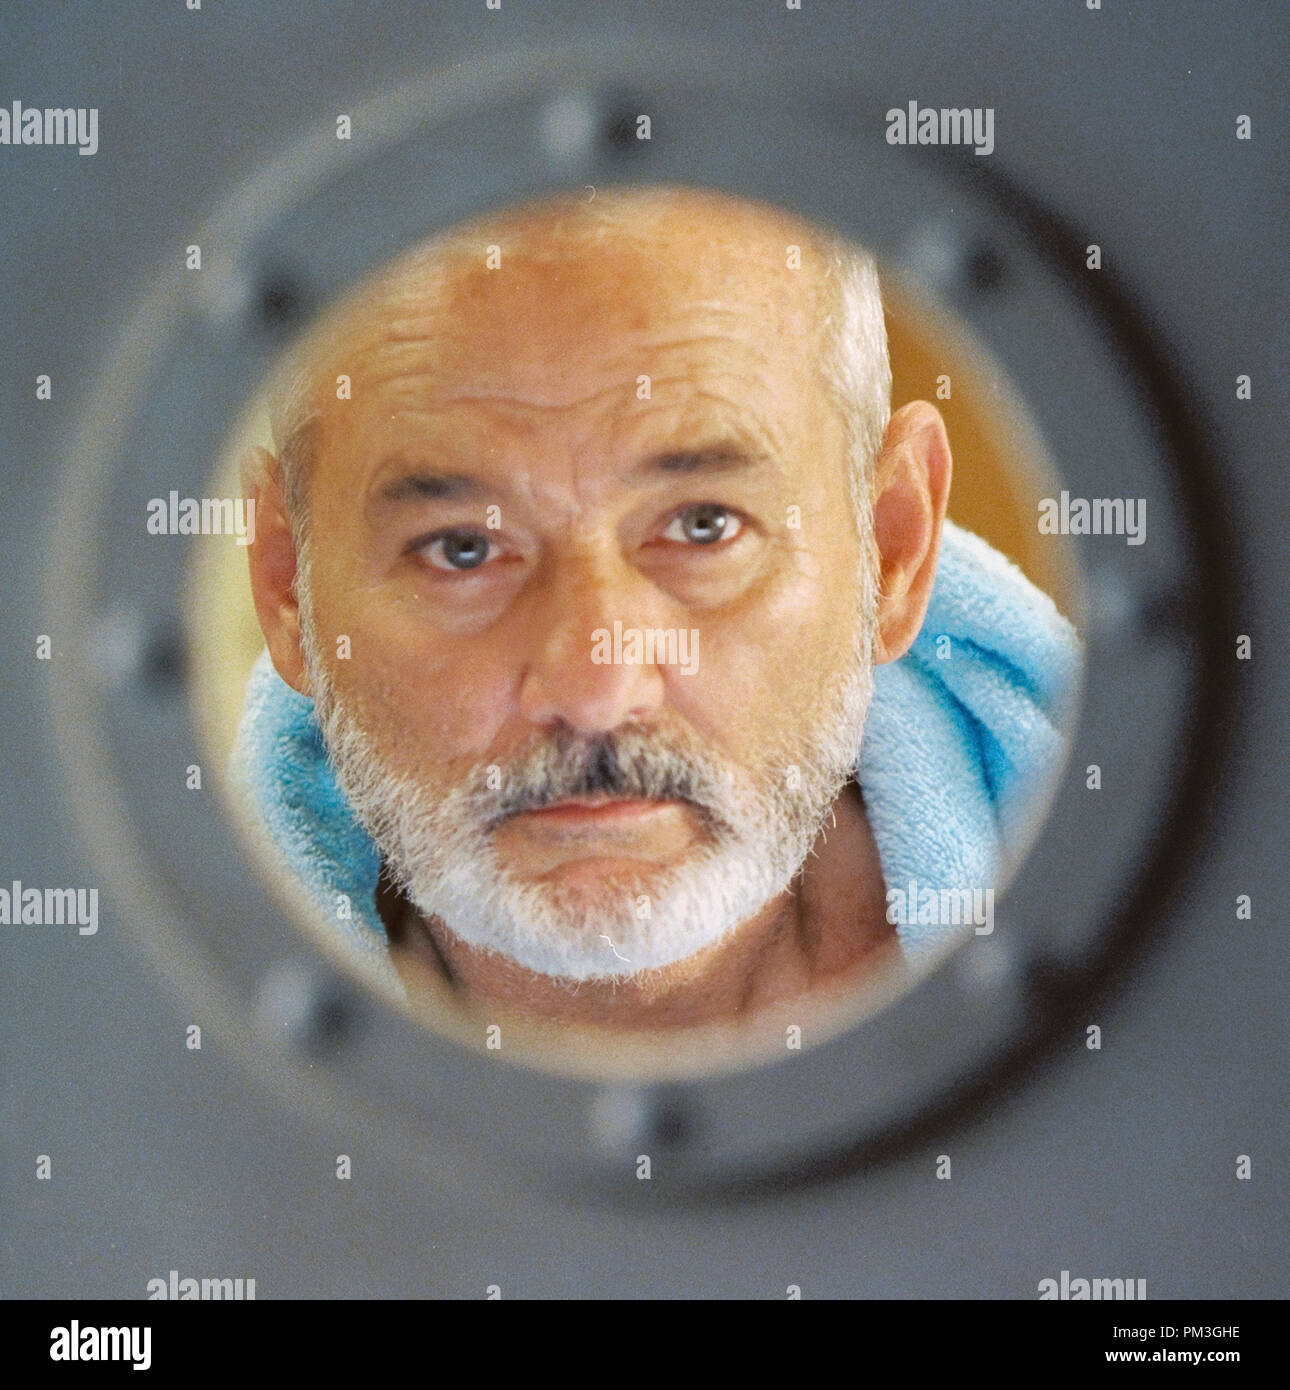 Film Still from 'The Life Aquatic with Steve Zissou' Bill Murray © 2004 Touchstone Pictures File Reference # 307351153THA  For Editorial Use Only -  All Rights Reserved Stock Photo